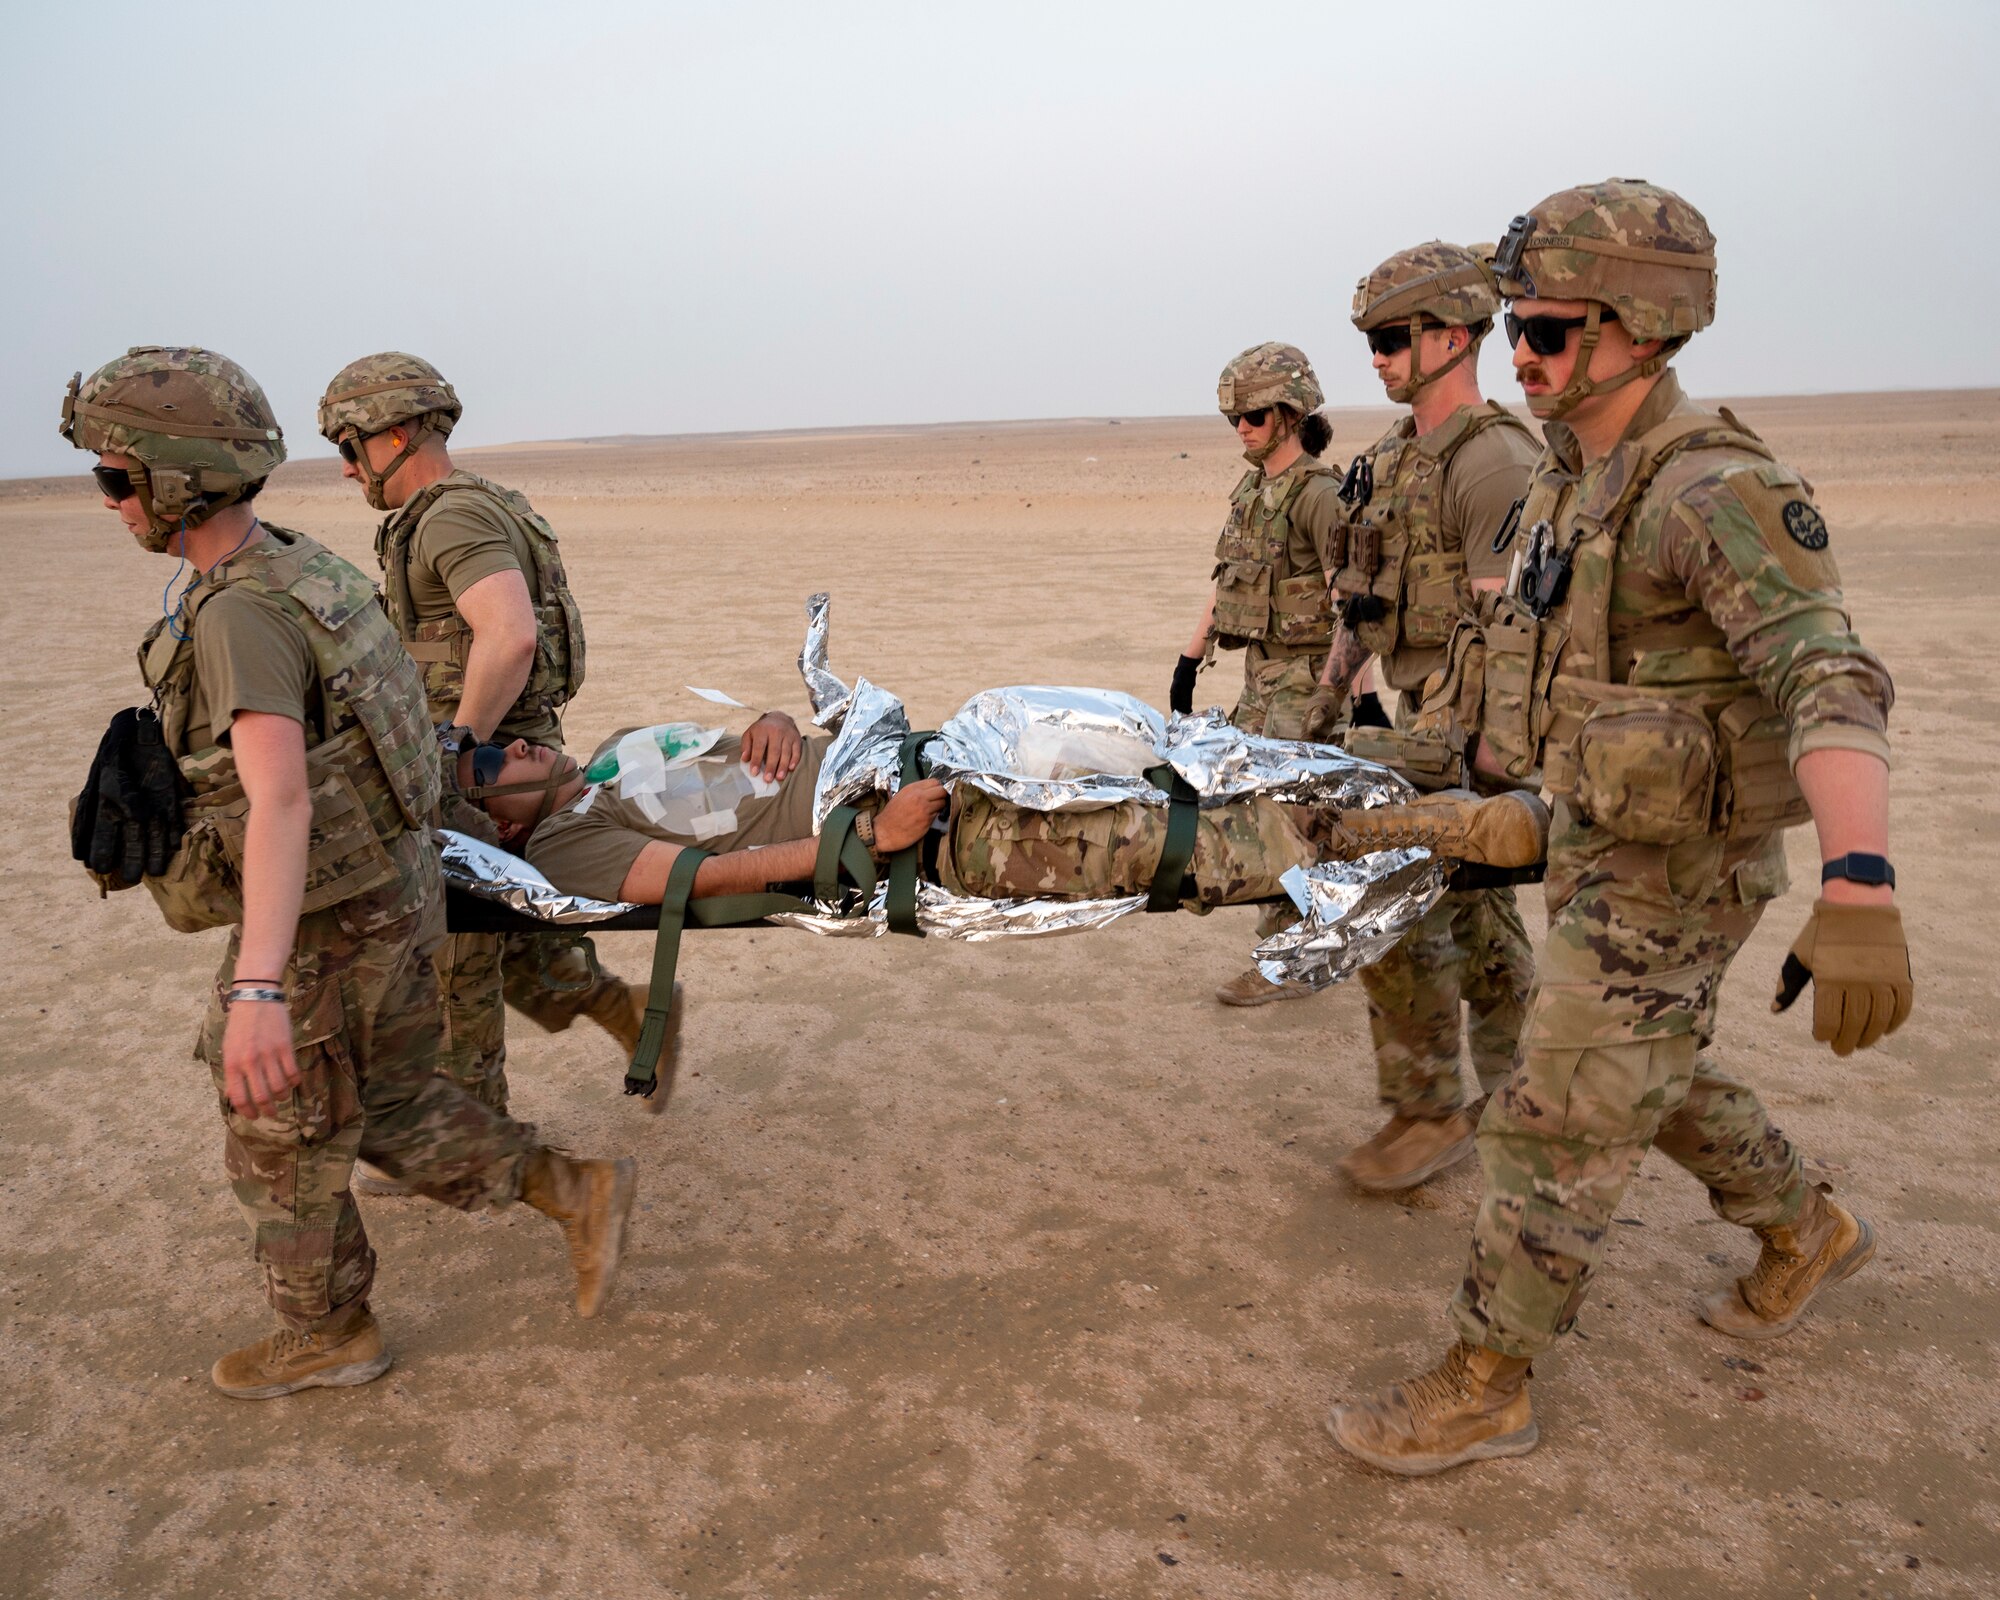 U.S. Army Soldiers move a patient on a litter during training at Udairi Range, Kuwait, March 14, 2023.